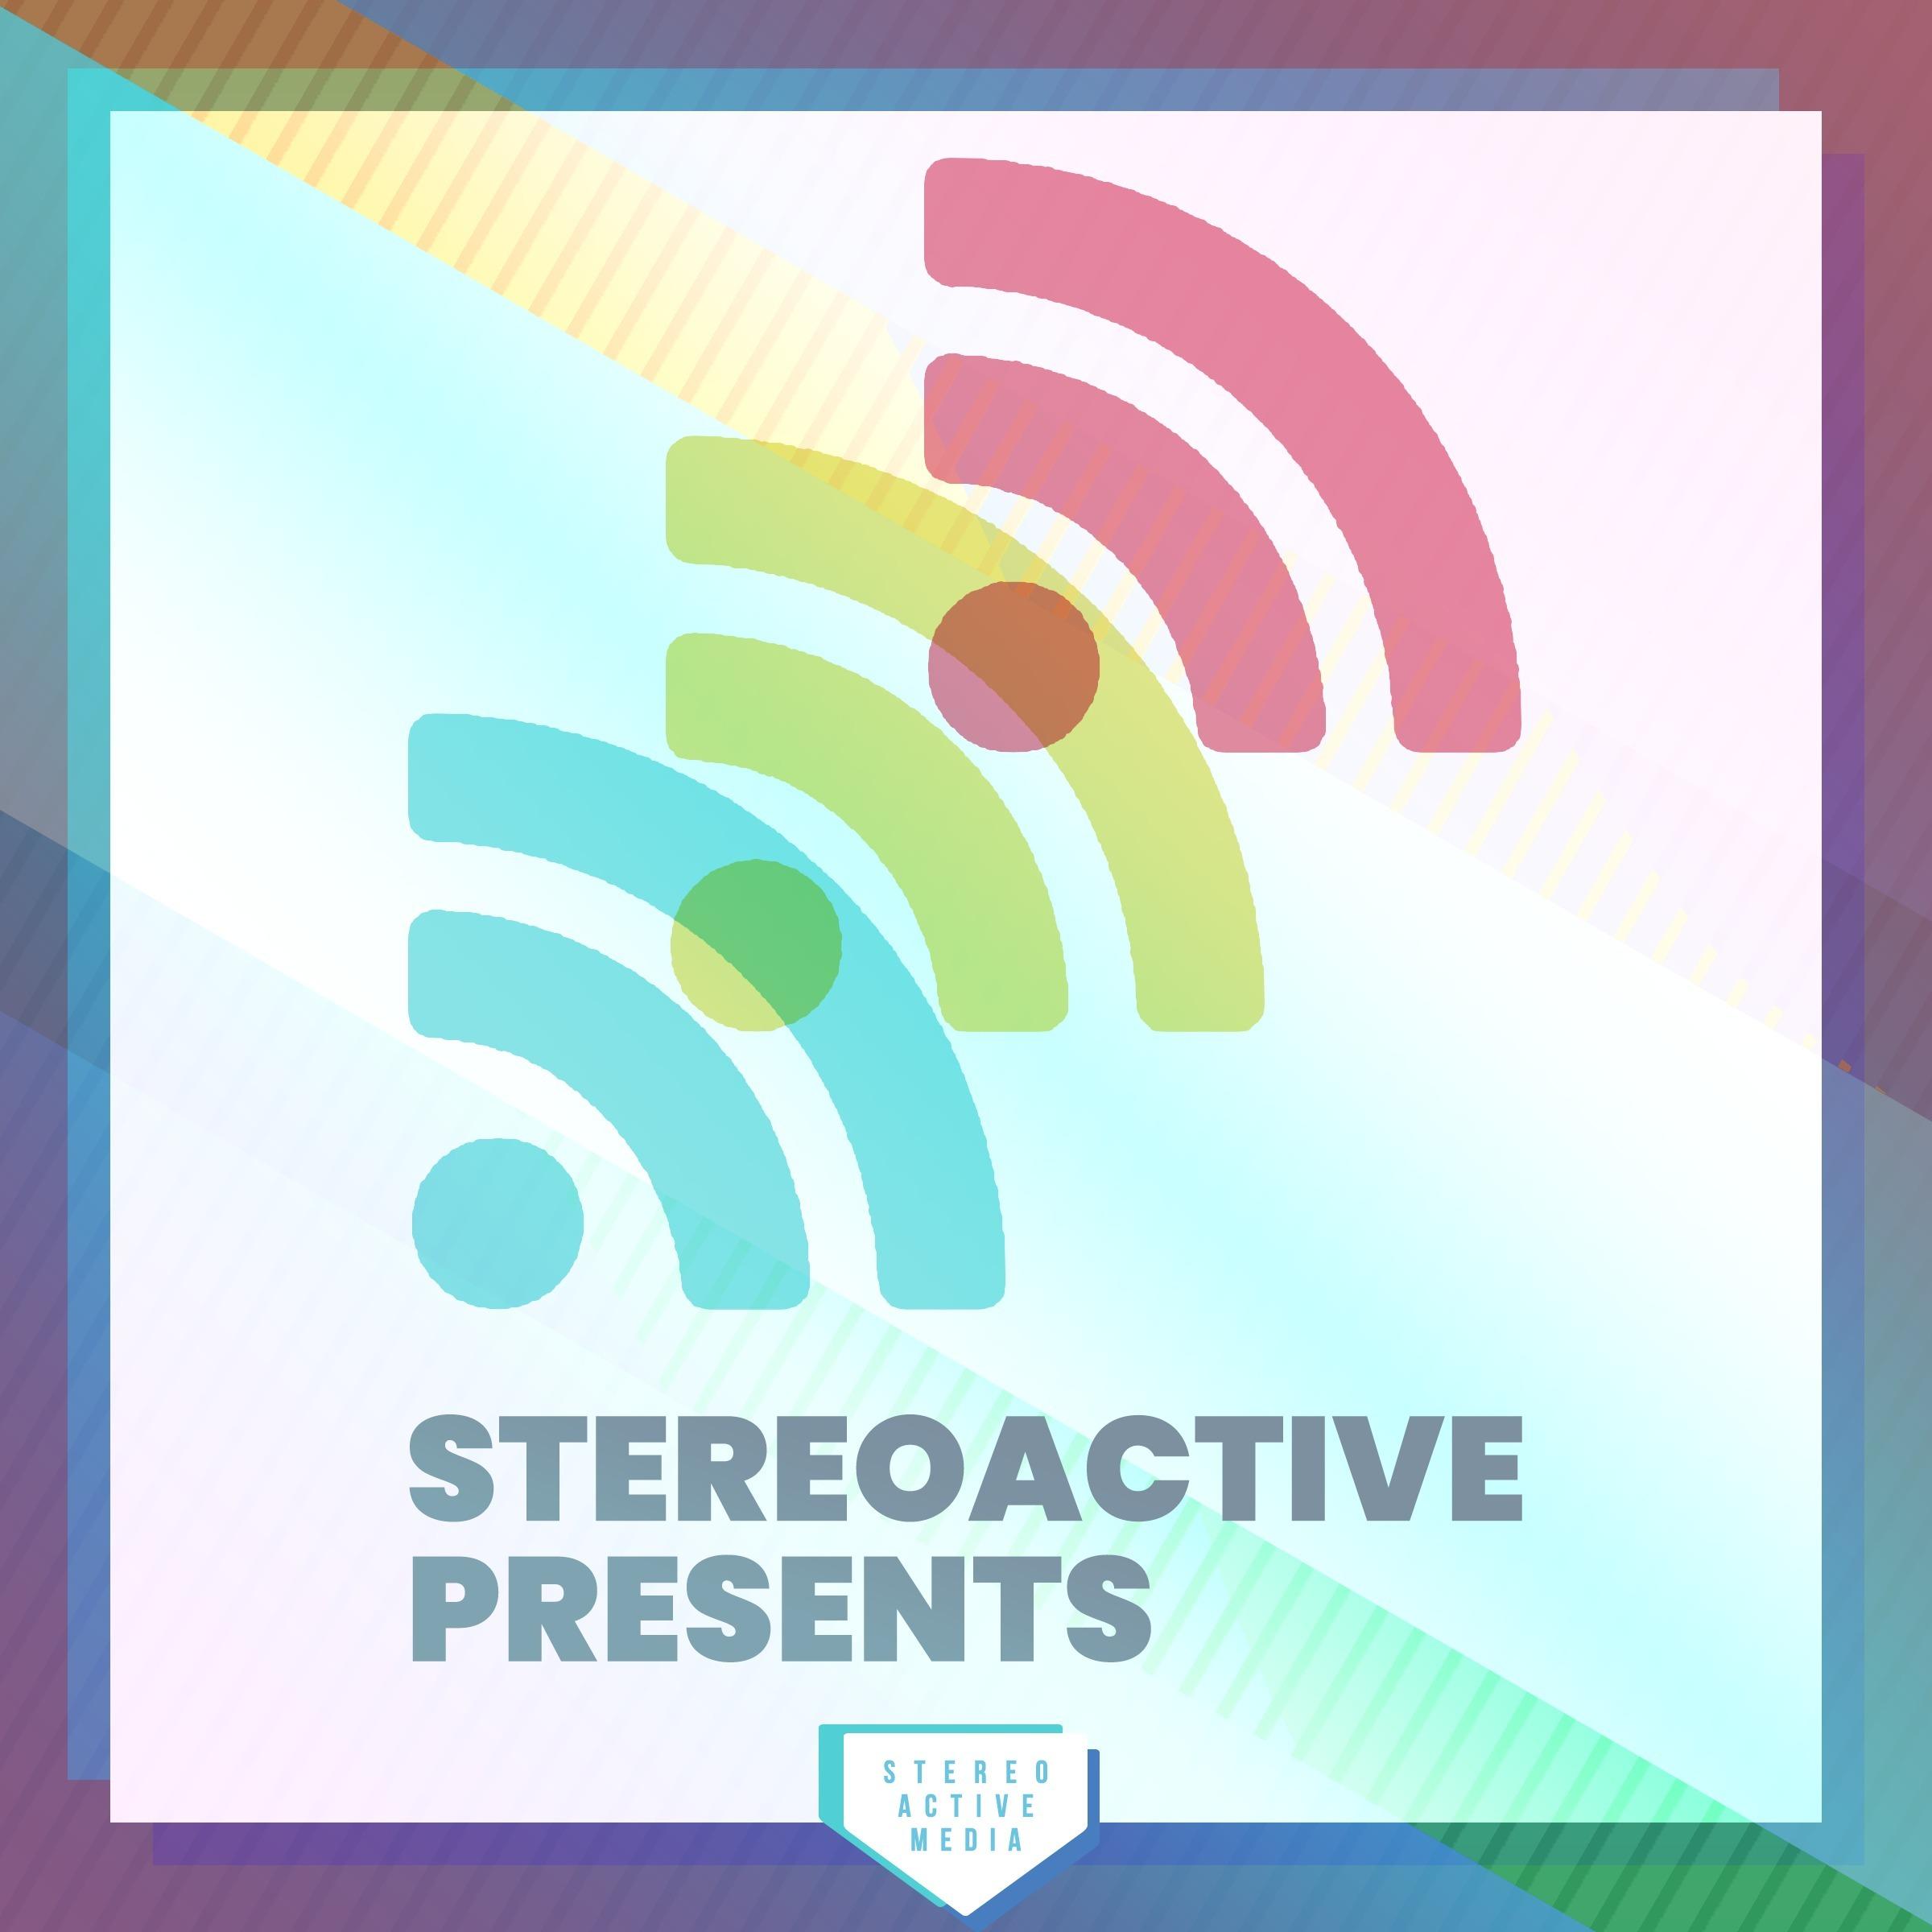 Stereoactive Presents